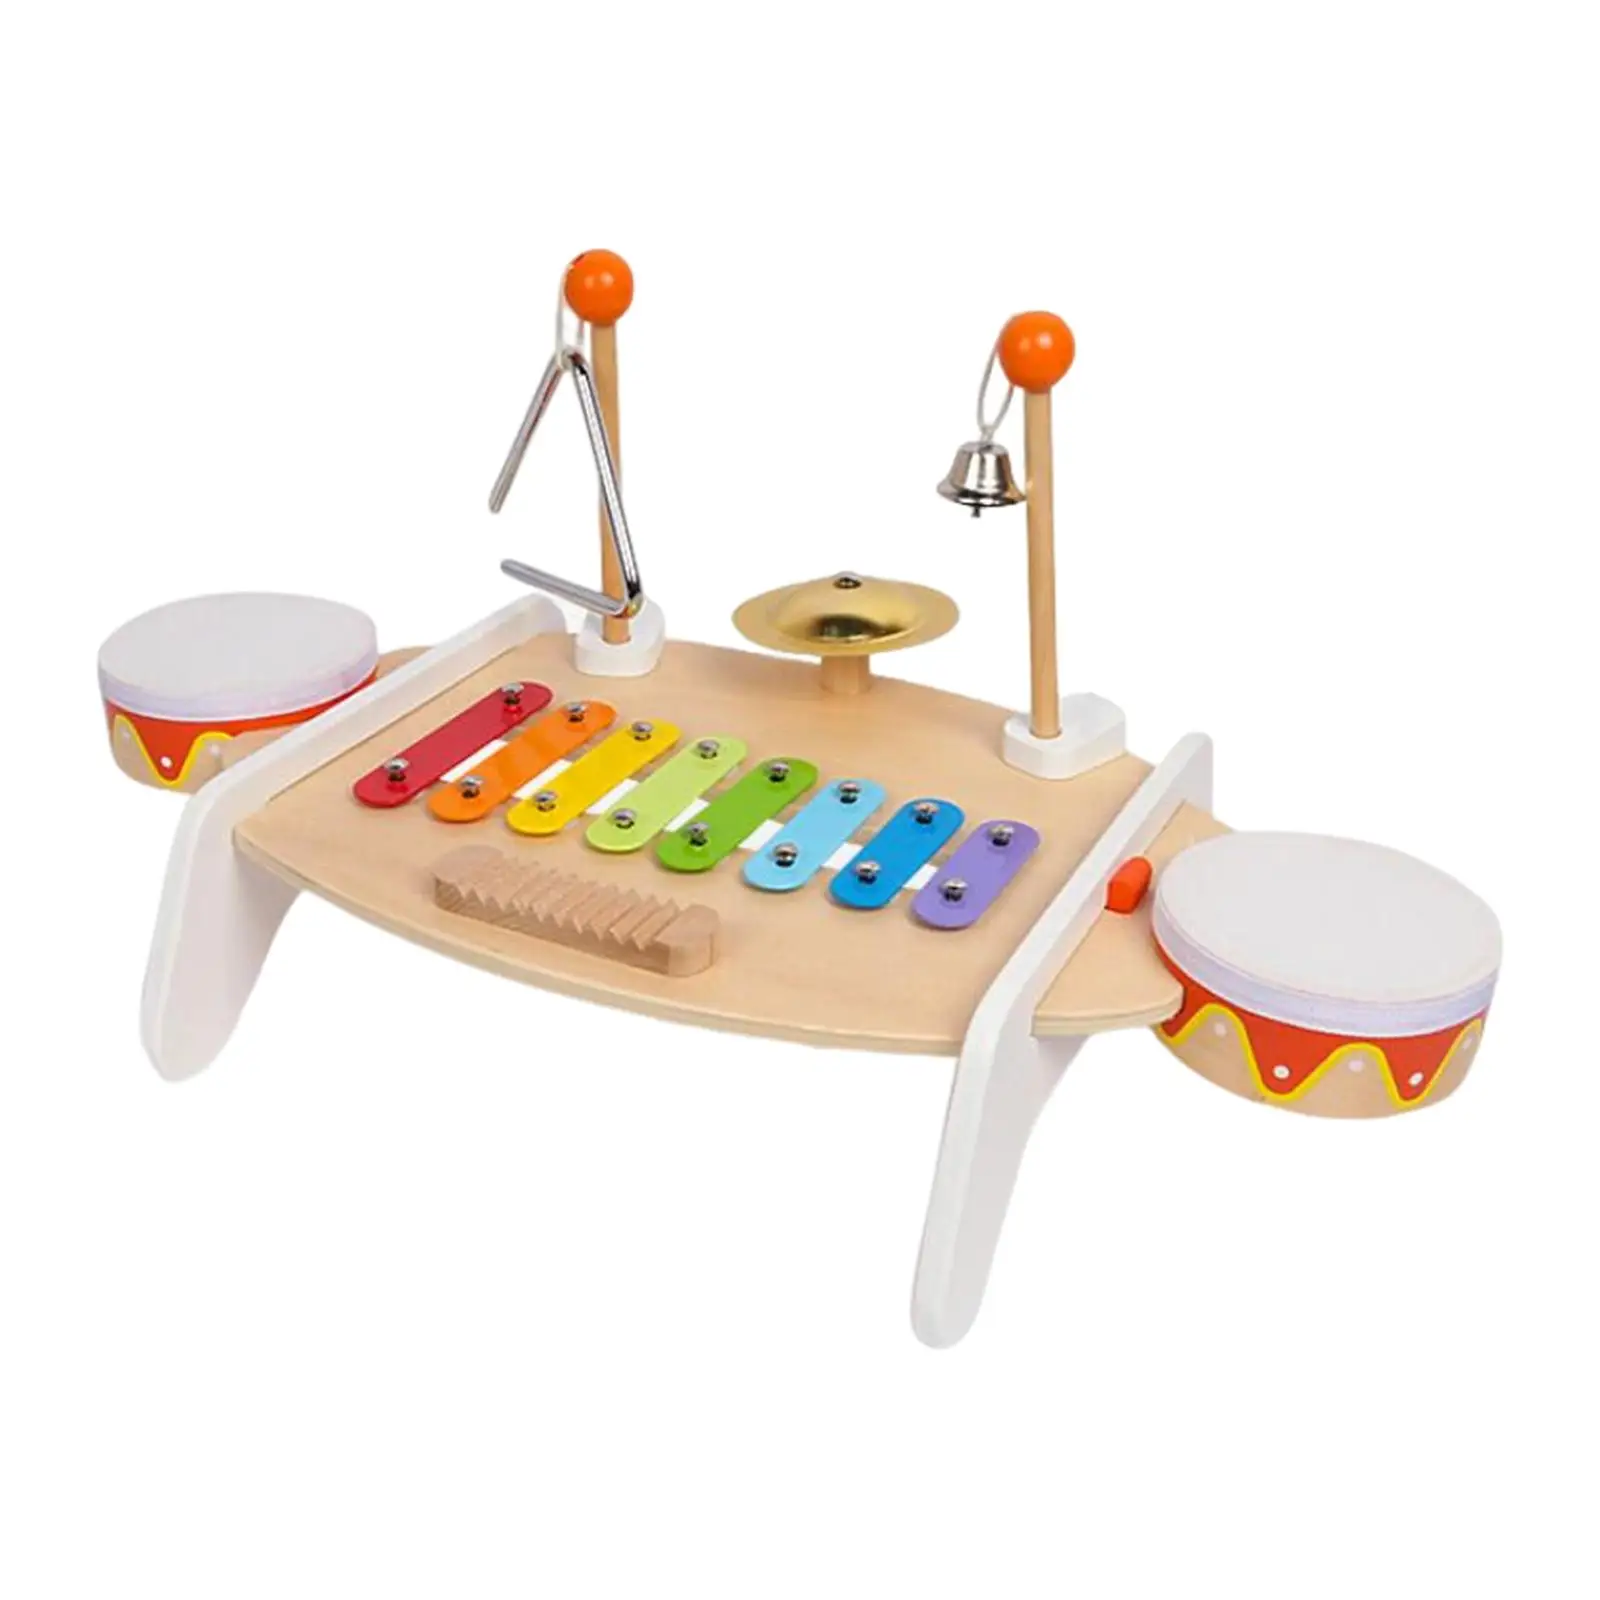 Multifunction Xylophone Toy Musical Instruments Montessori Toy Sensory Musical Toy for Boys Kids Girls Children Birthday Gift